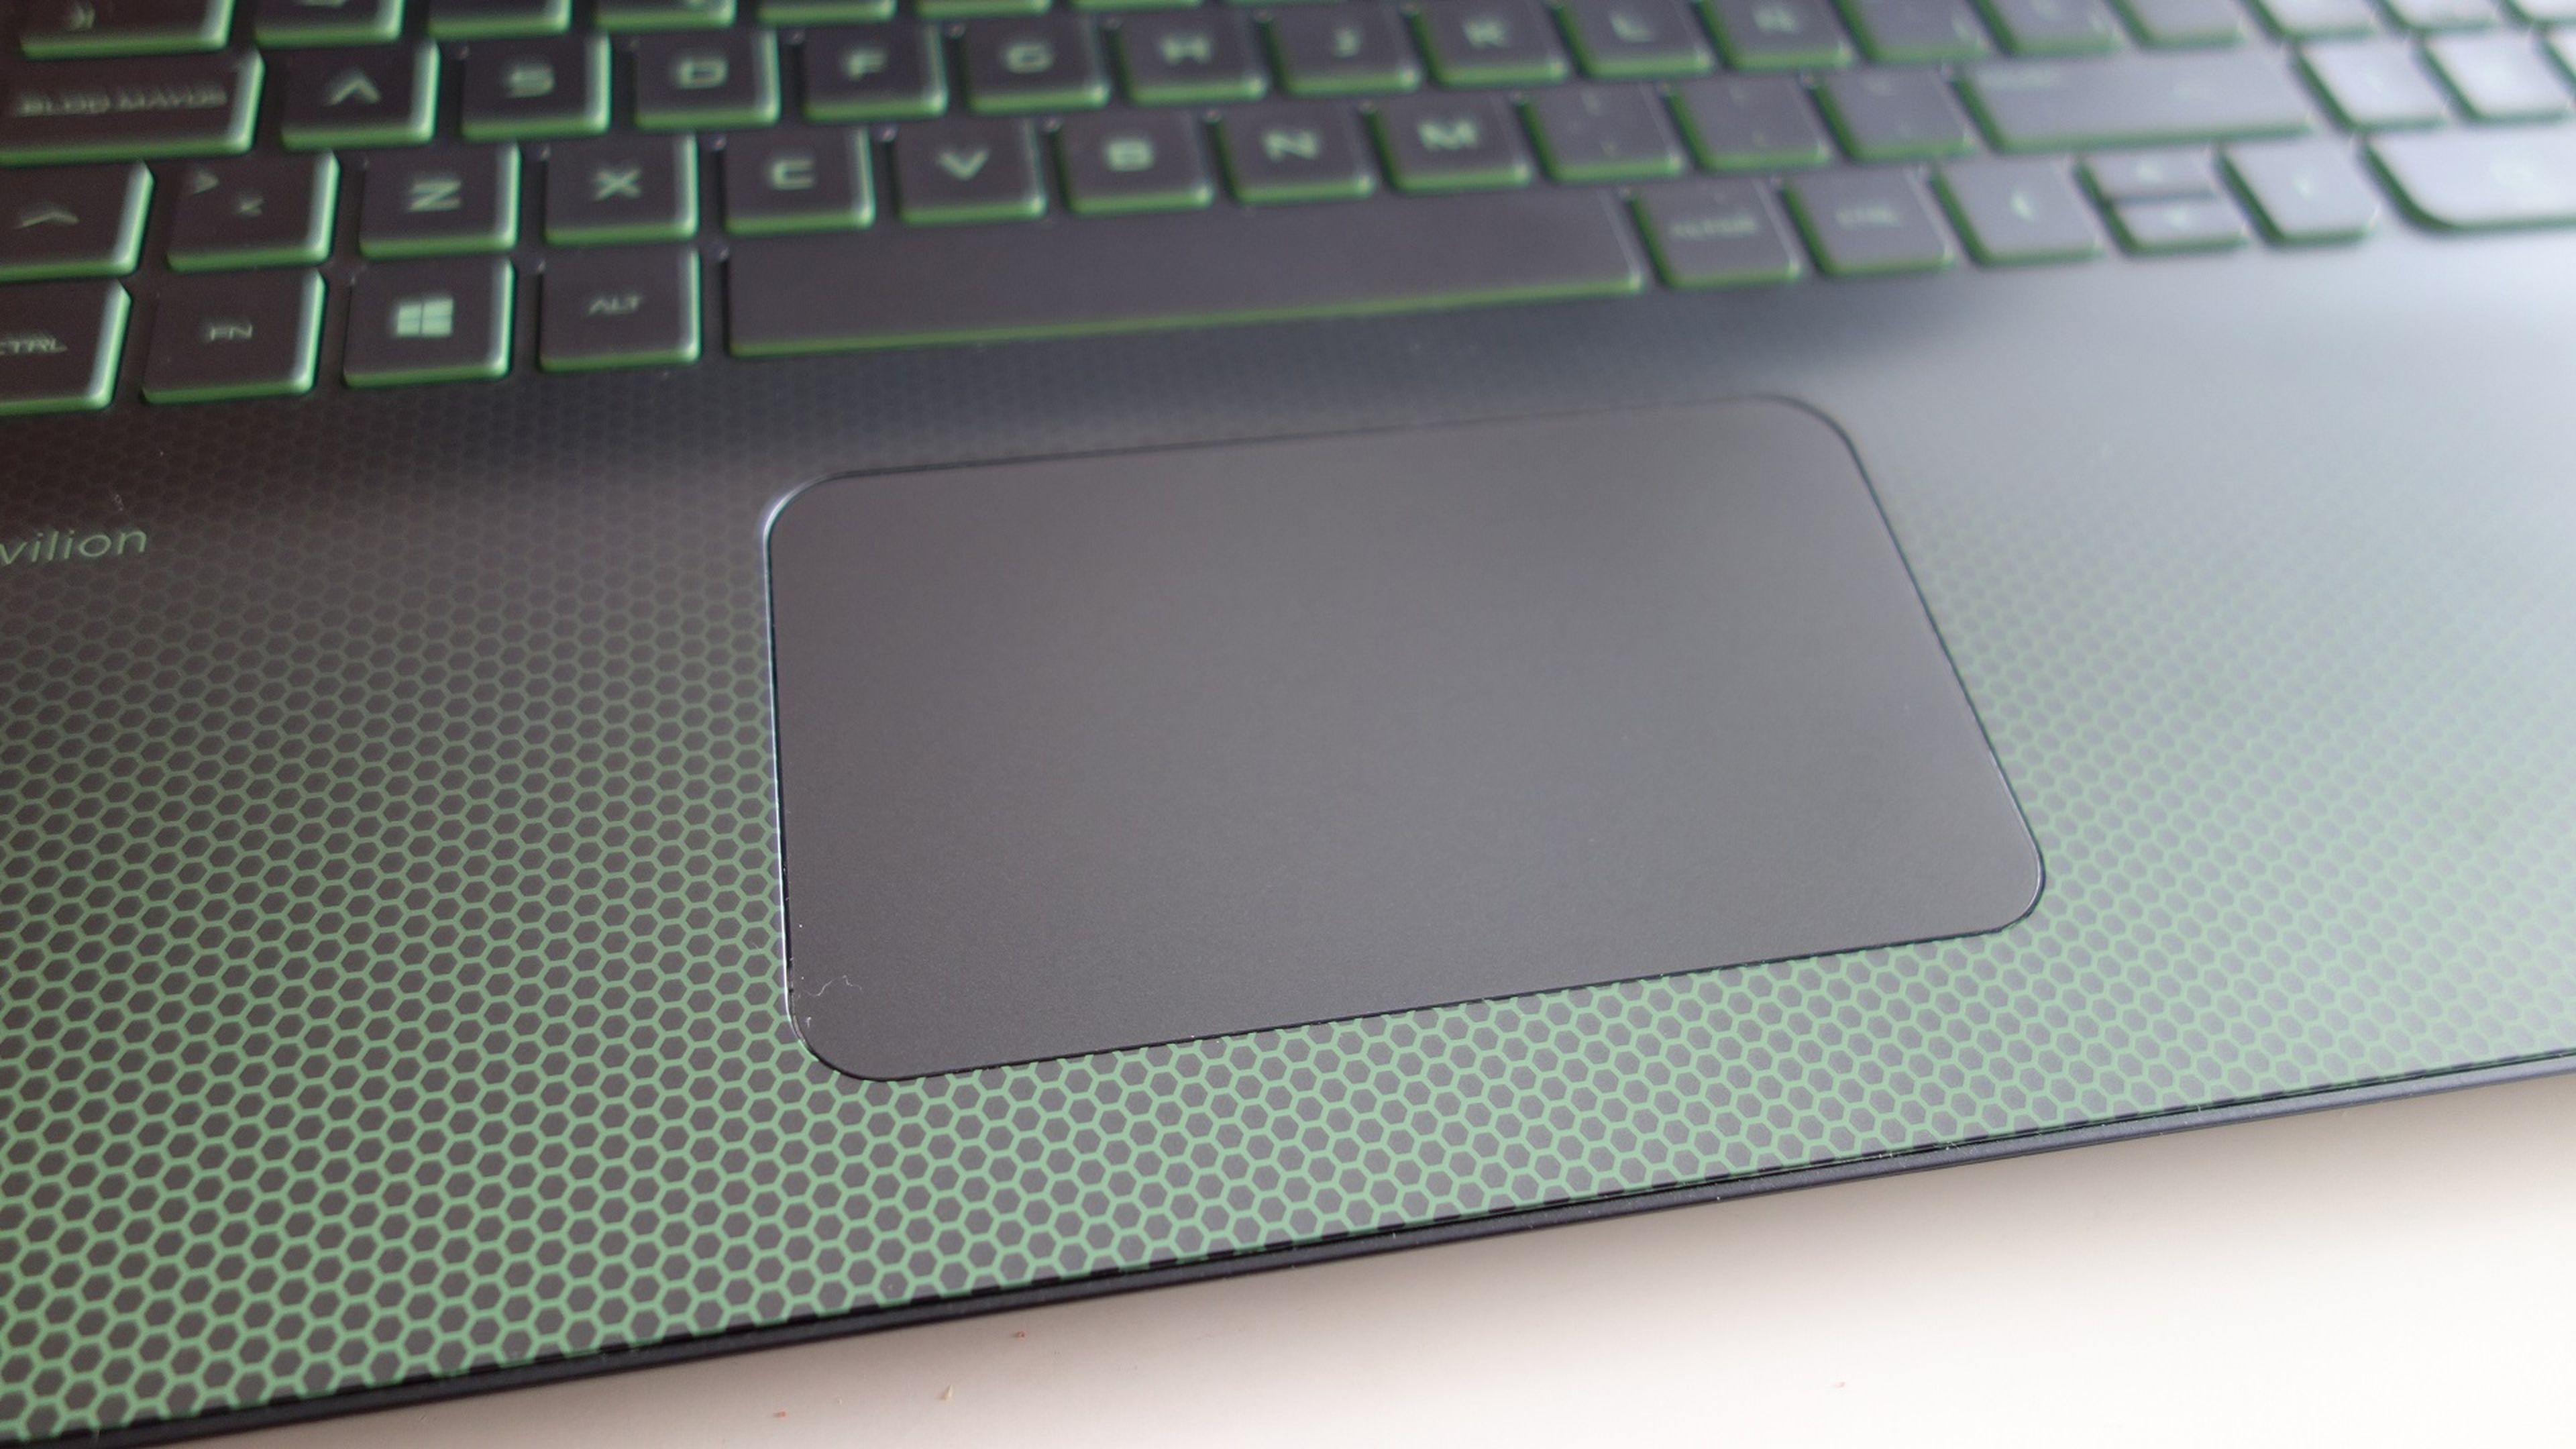 Touchpad del HP pavilion 15 gaming